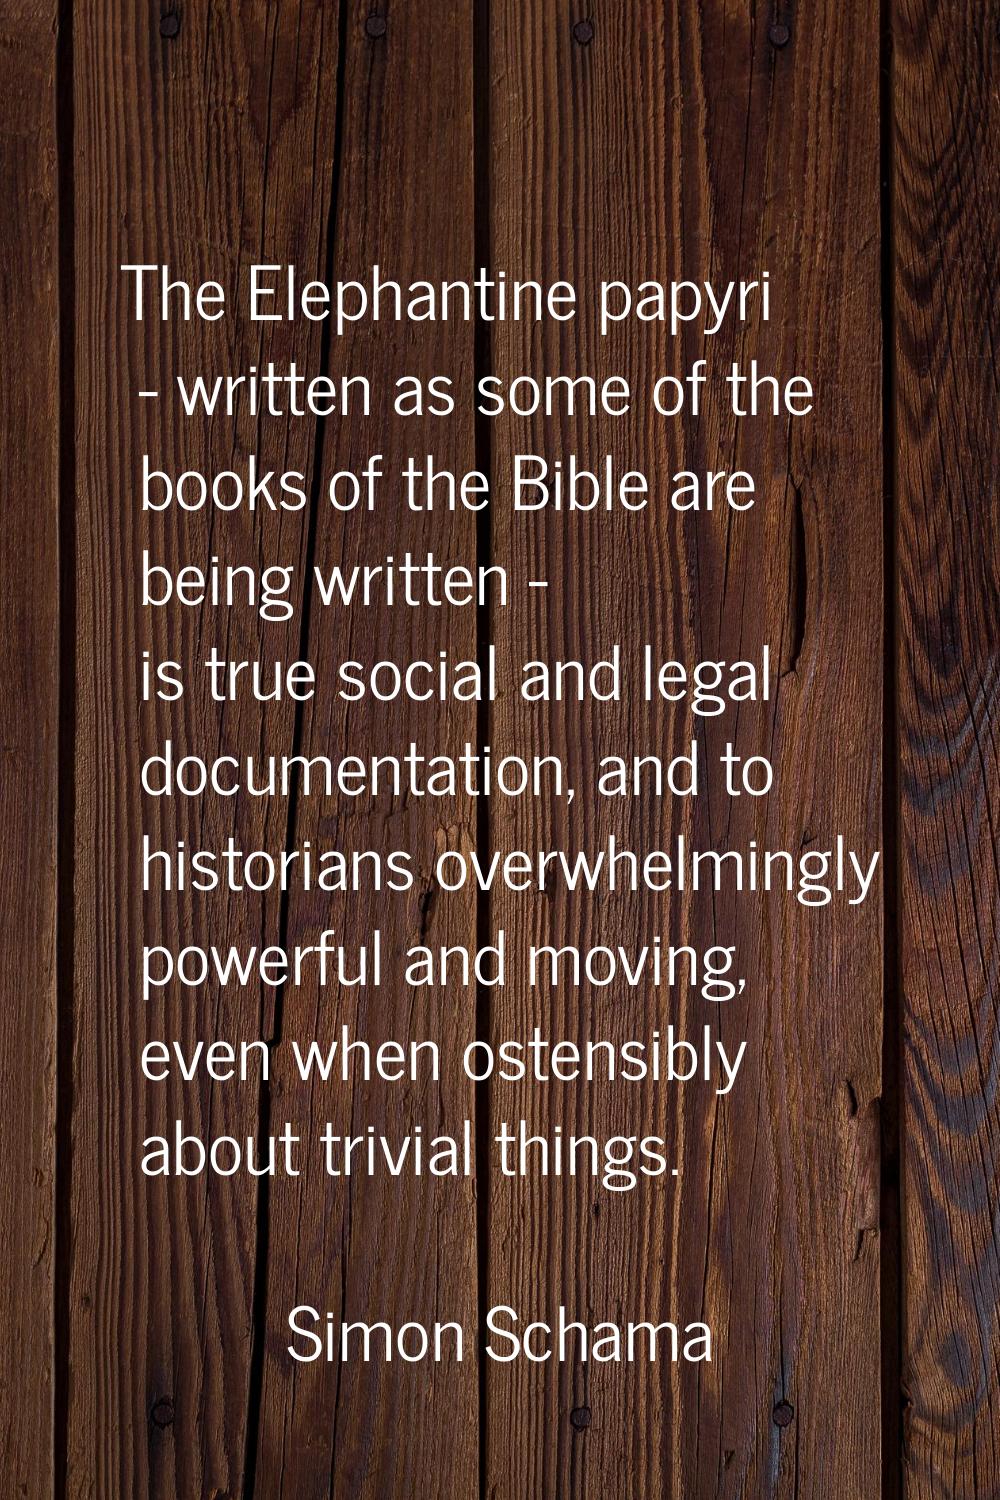 The Elephantine papyri - written as some of the books of the Bible are being written - is true soci